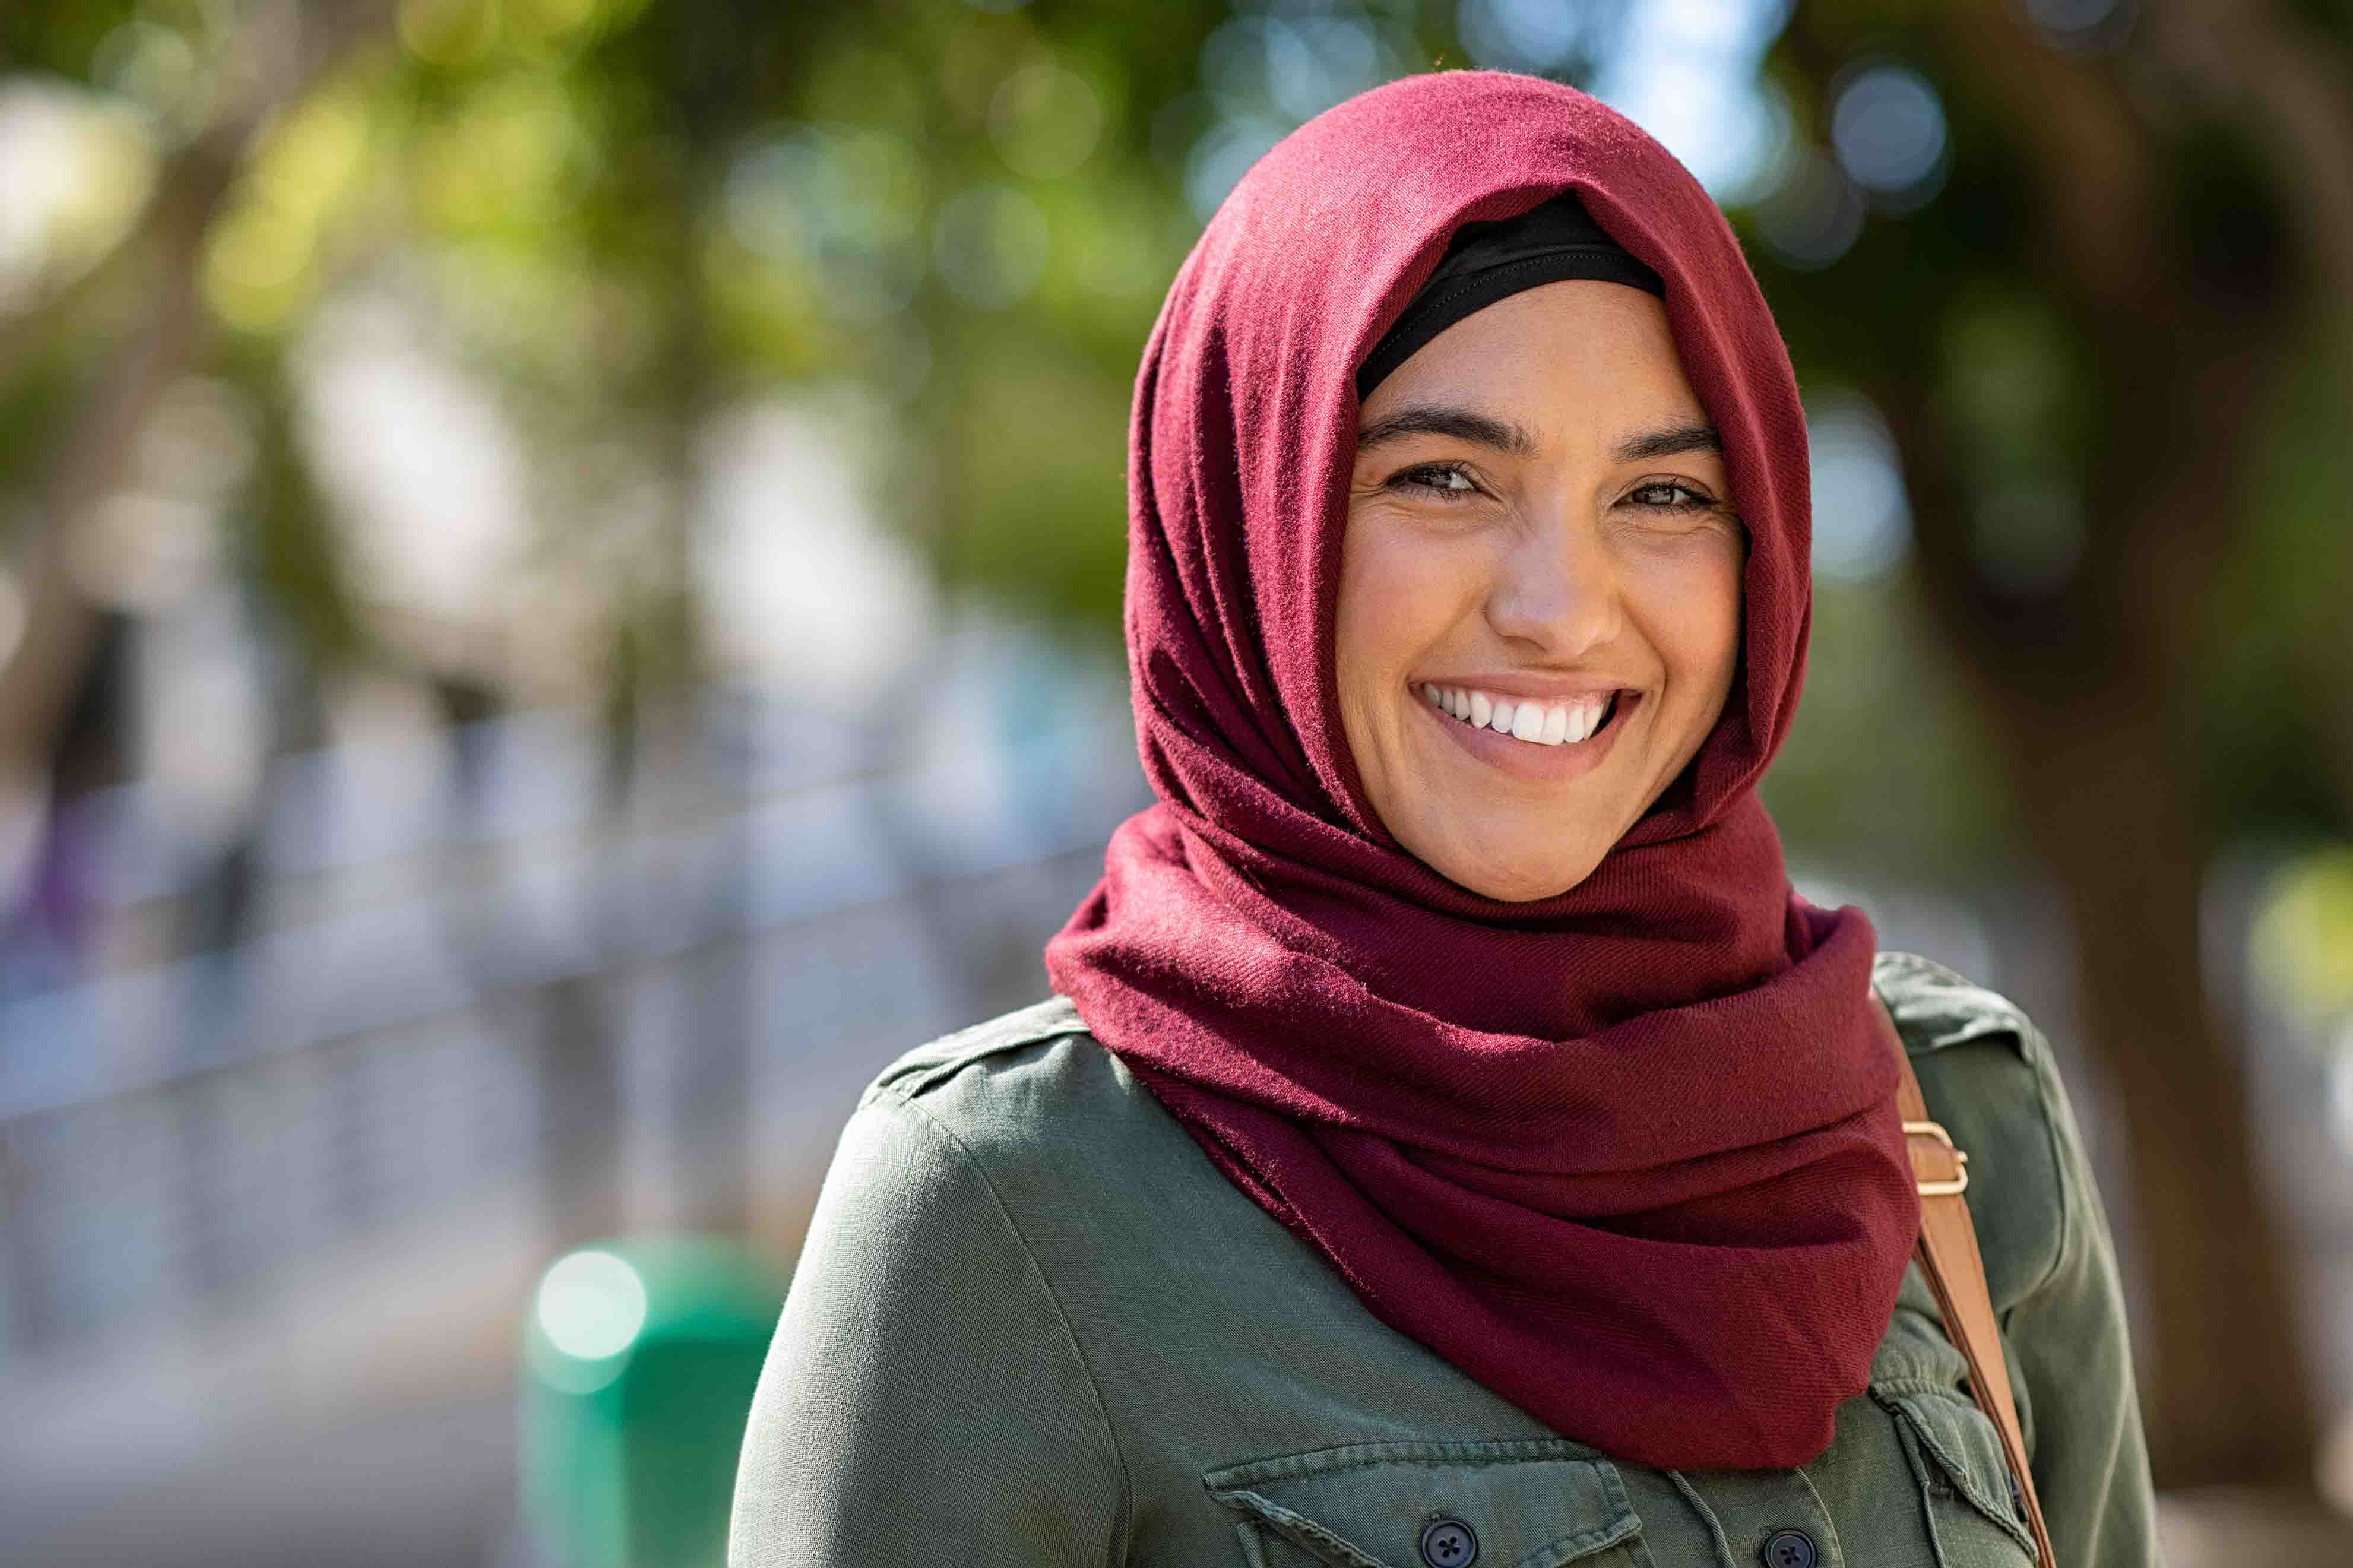 Image shows a young woman wearing a hijab and smiling to the camera.